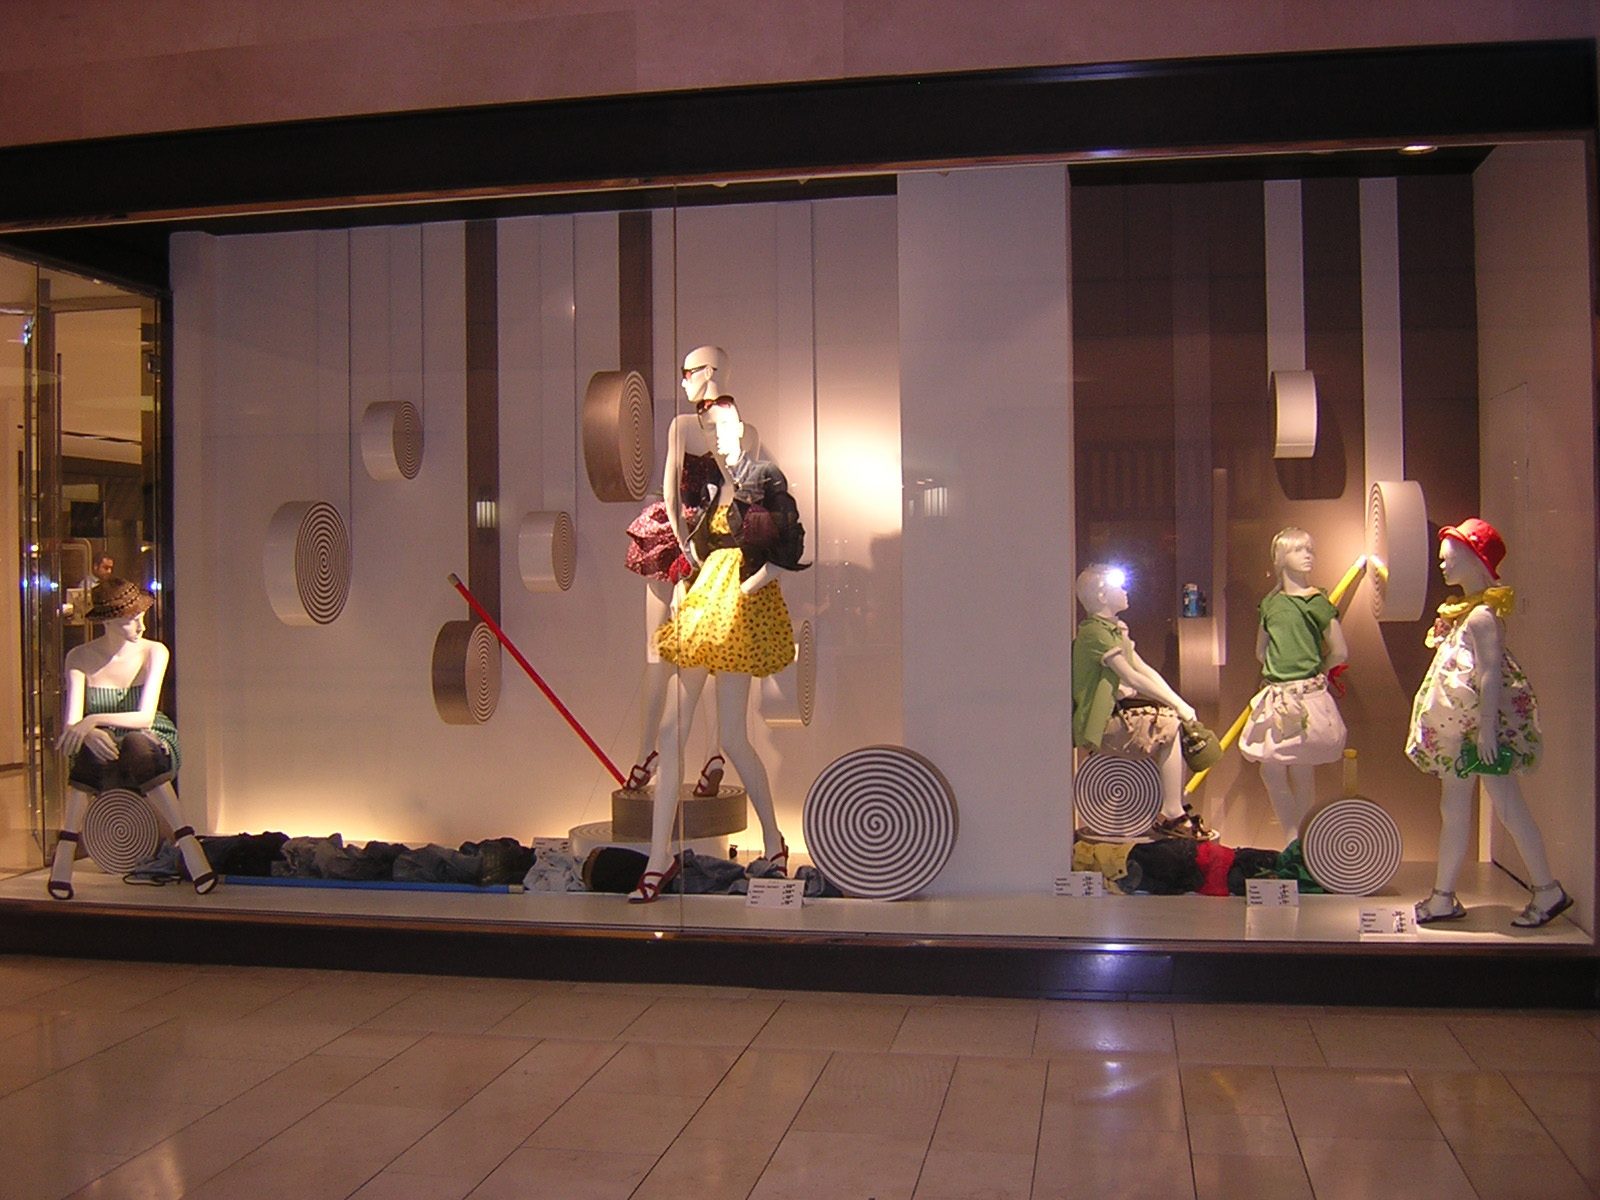 Store Windows in Galleria Dallas: Clean to the Point of Sterile